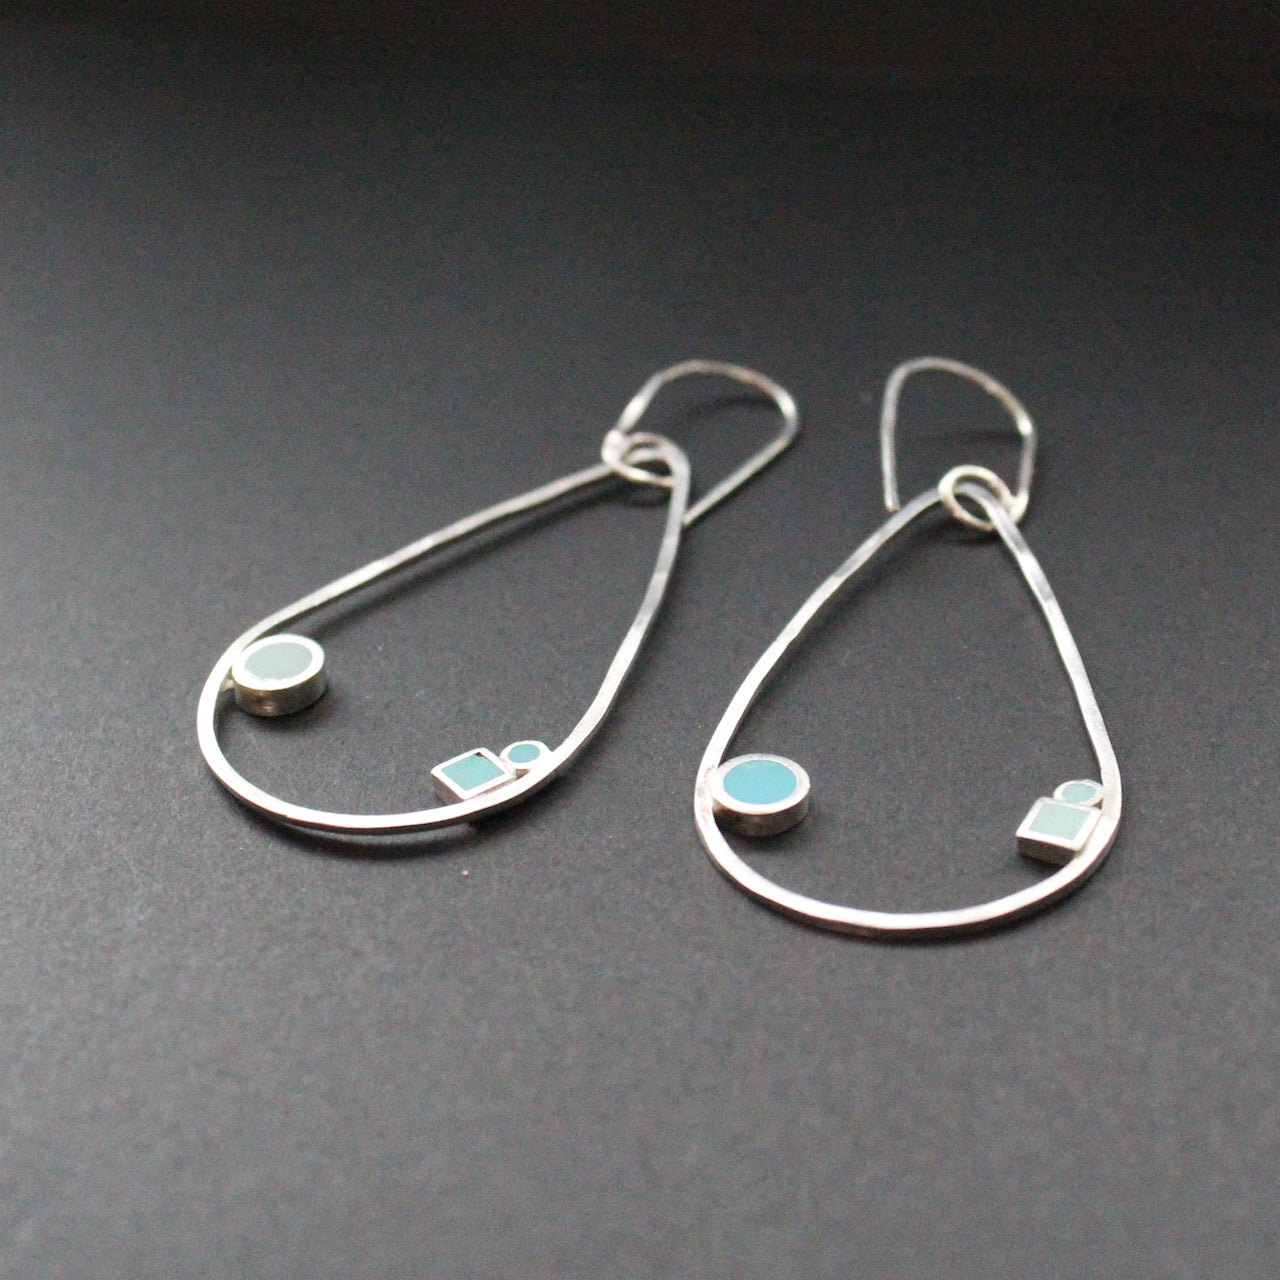 Raindrop shaped drop earrings with round and square dots in turquoise and aqua sitting inside raindrop by artist Clare Lloyd.